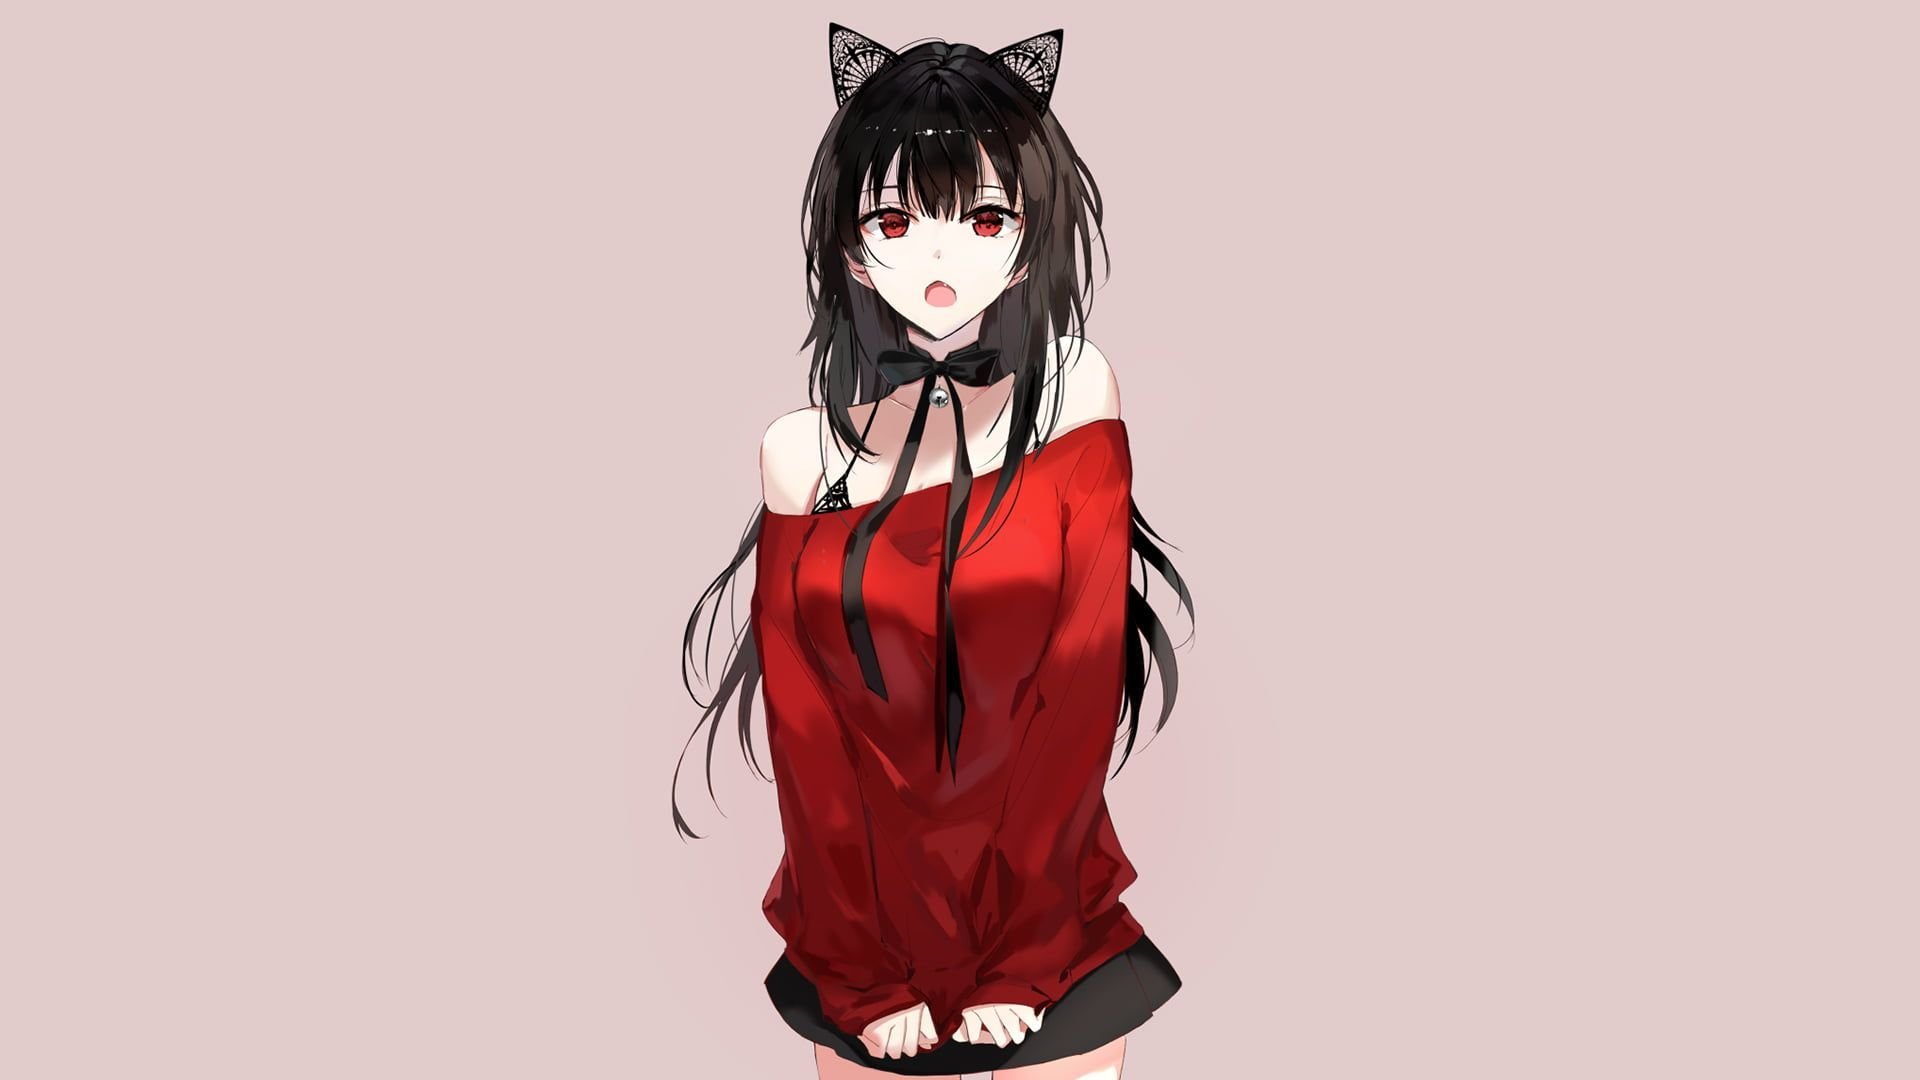 Black and Red Anime Girl Wallpaper Free Black and Red Anime Girl Background